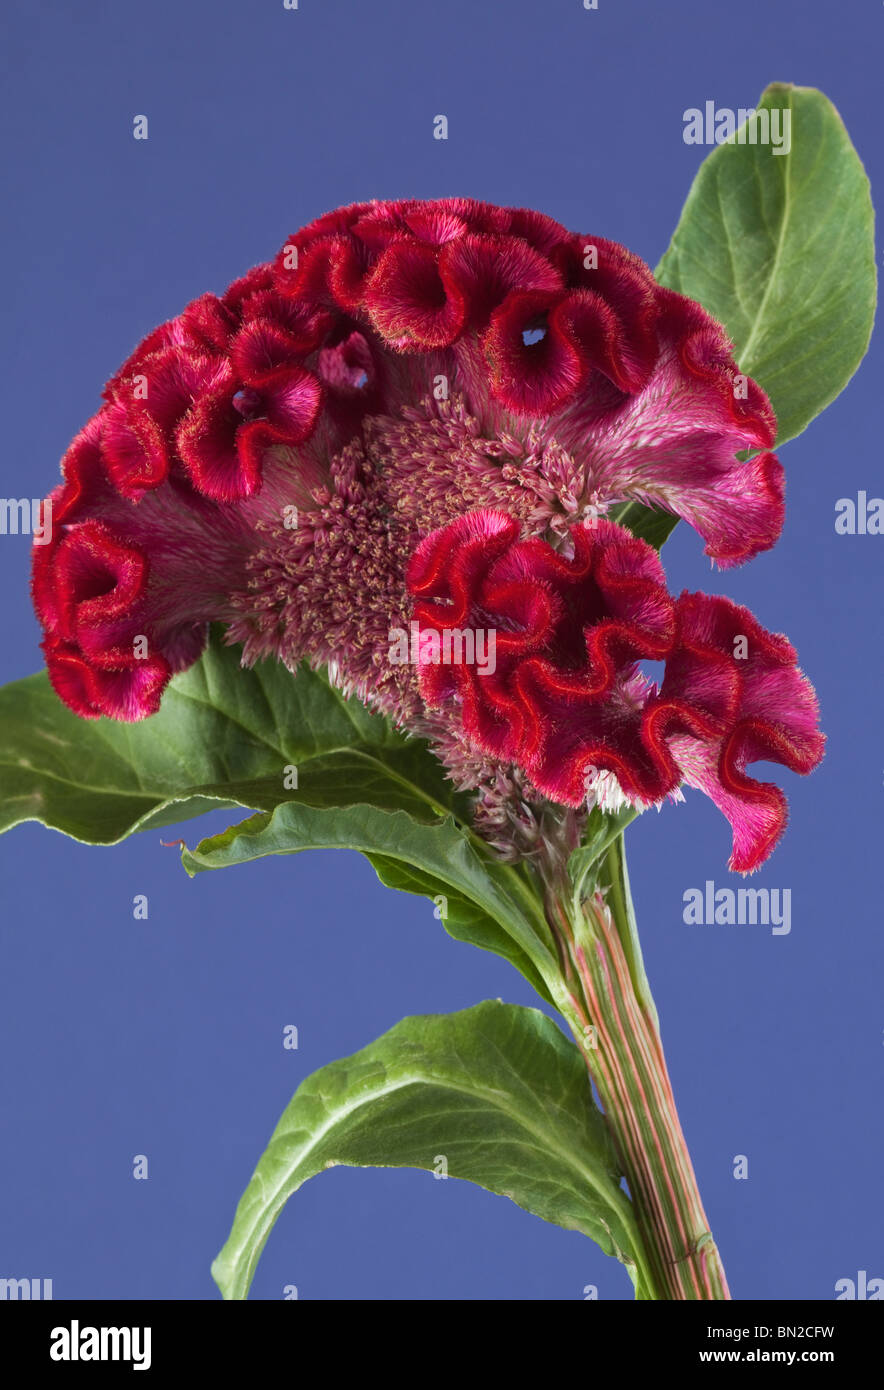 Red Celosia Cockscomb on blue background Stock Photo